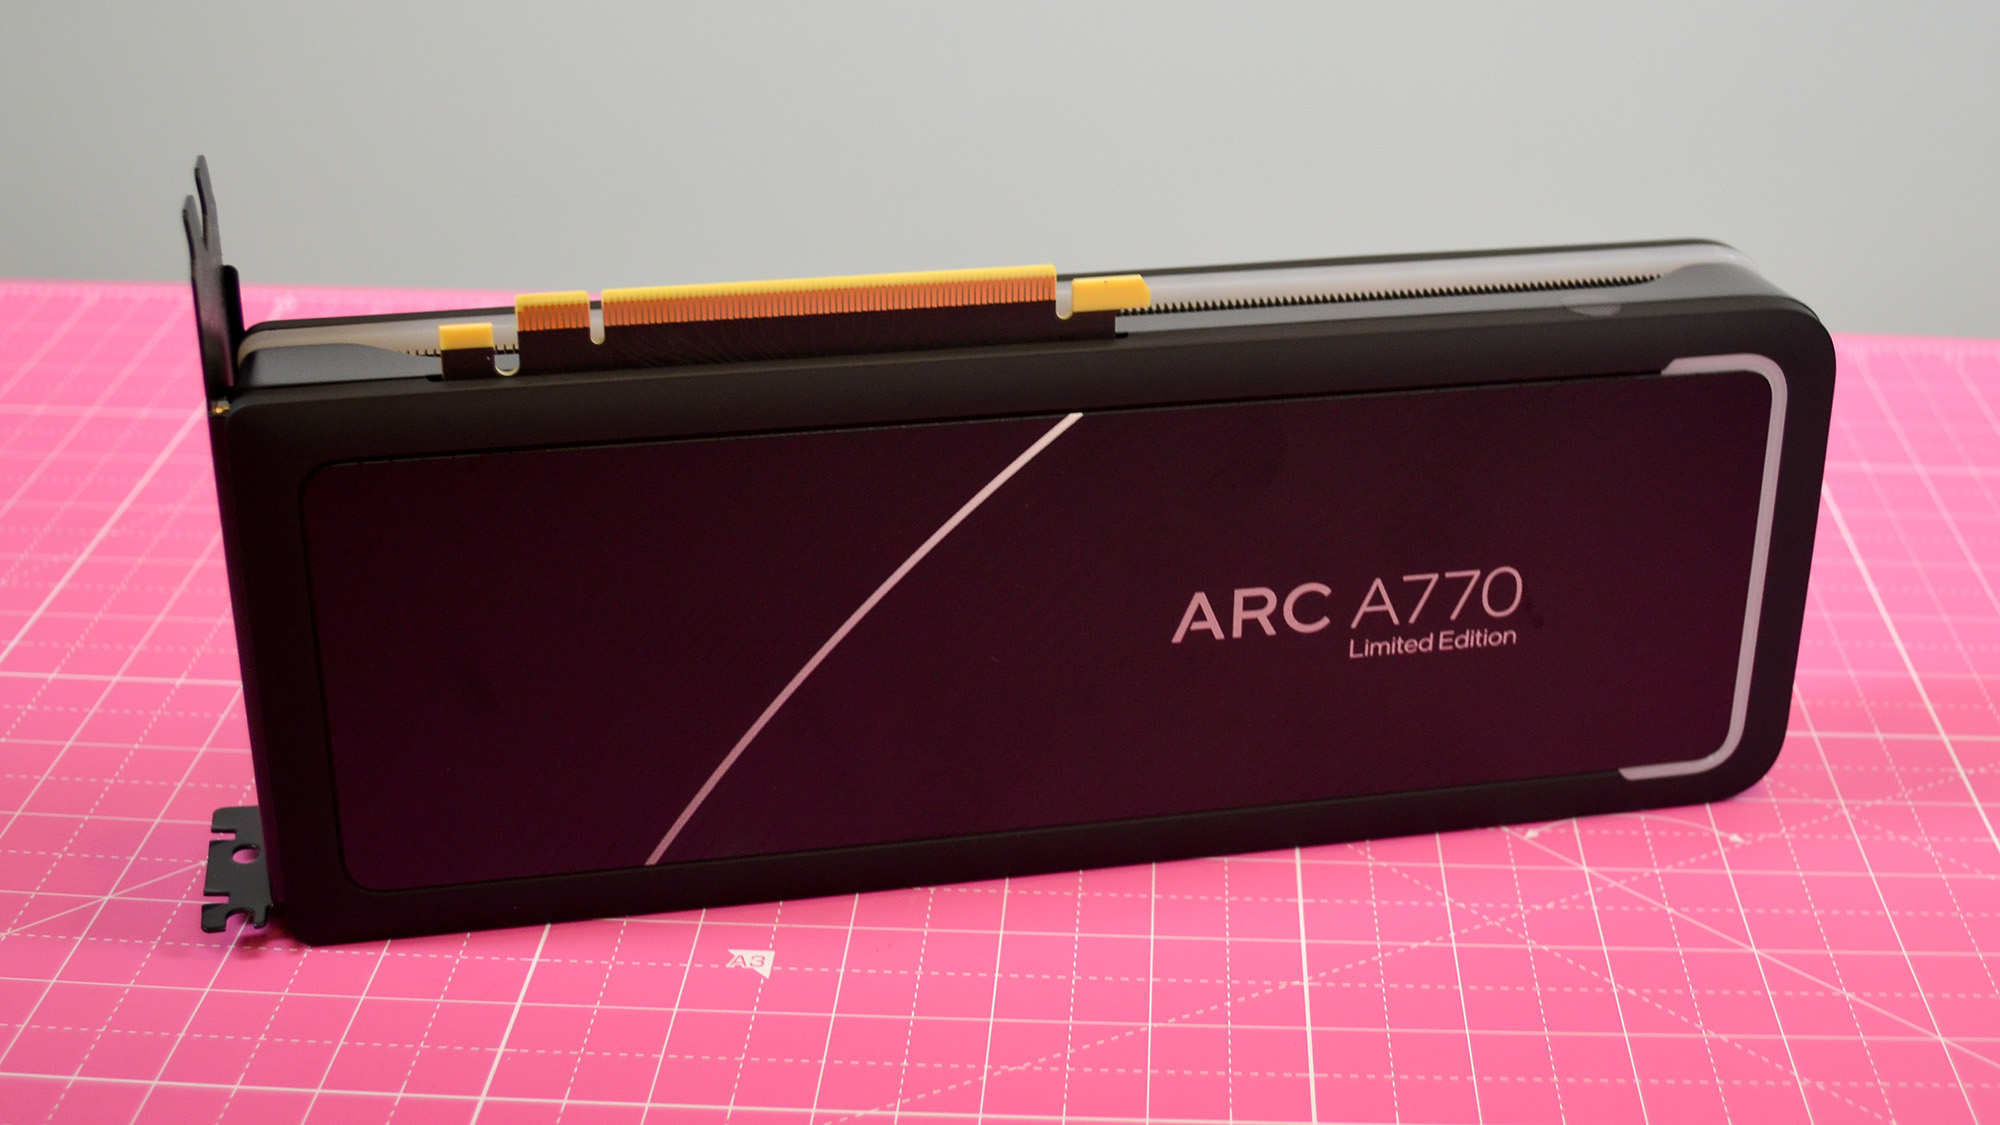 An Intel Arc A770 LE graphics card on a table with a pink desk mat